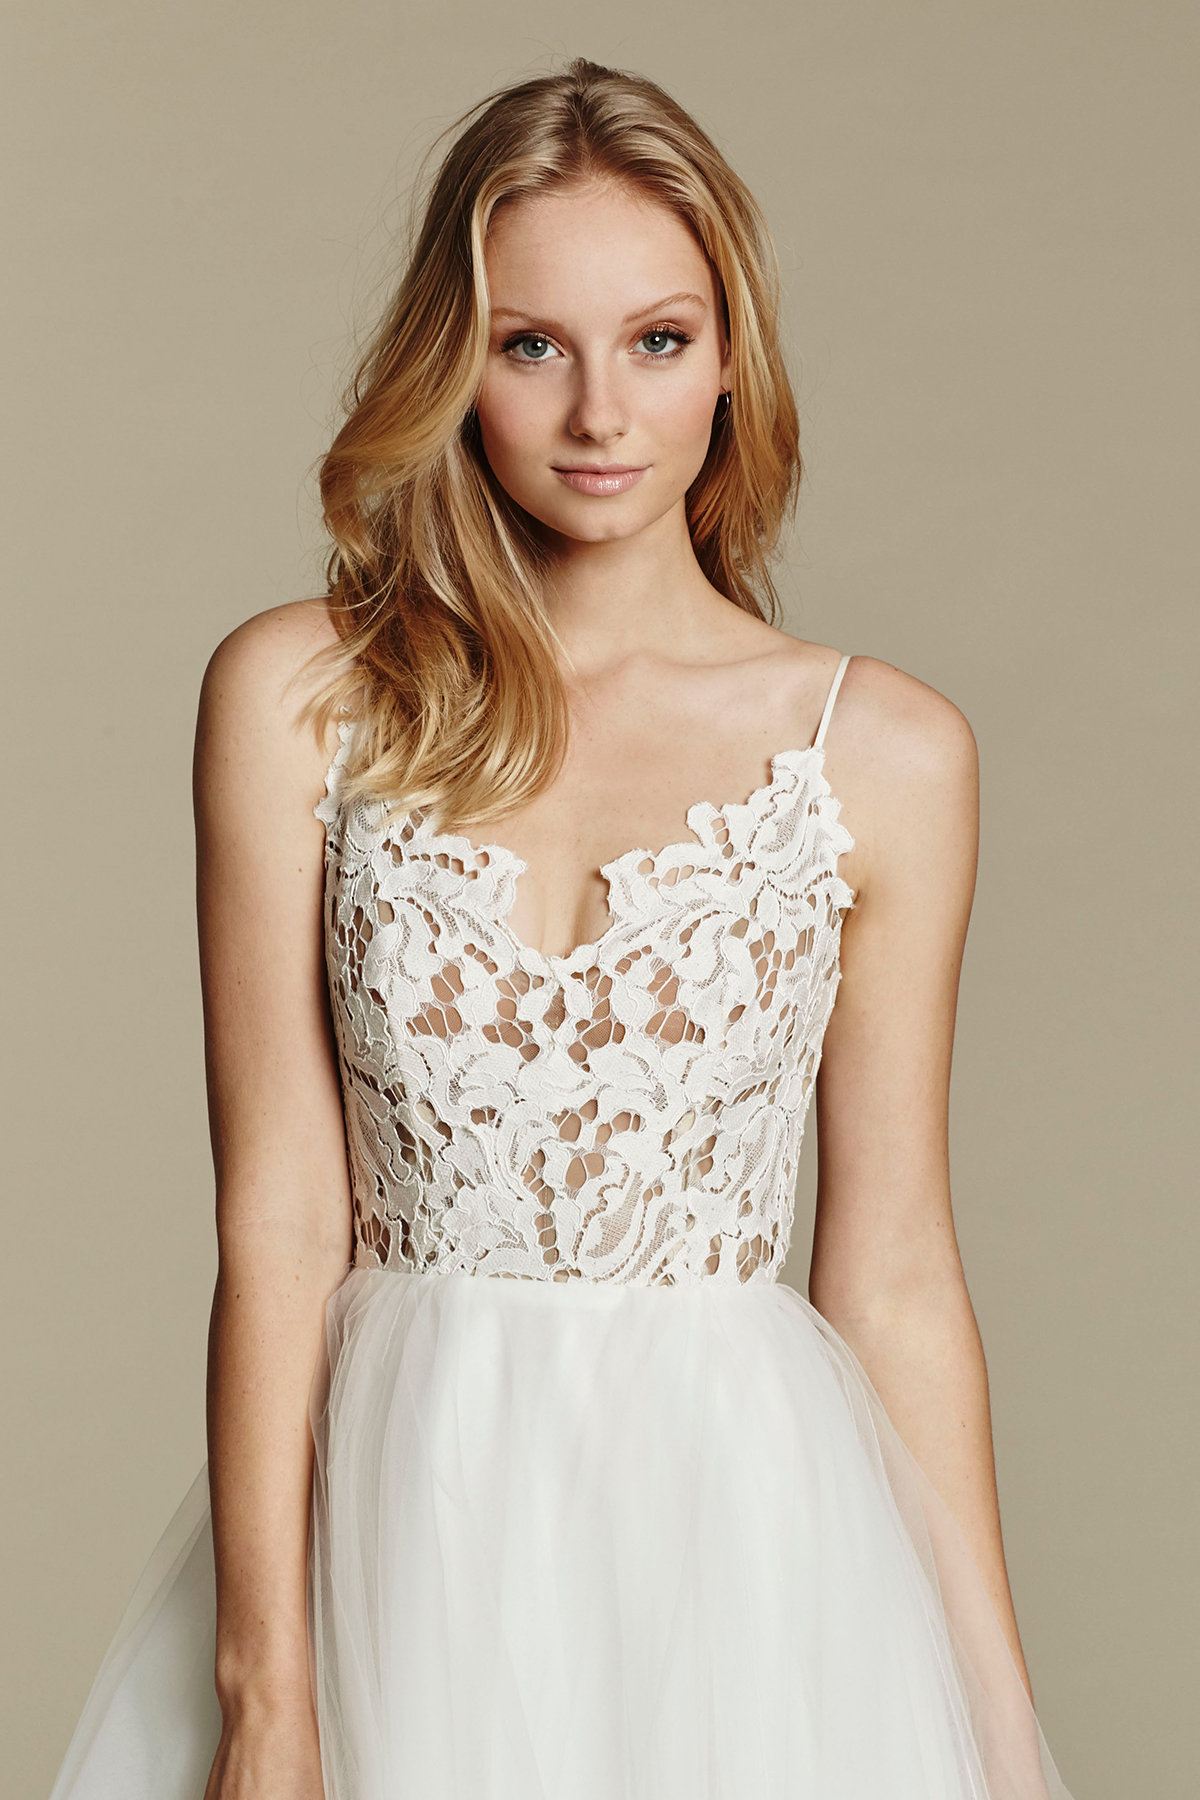 blush-hayley-paige-bridal-lace-tulle-ball-gown-scalloped-v-neck-strap-tiered-tulle-horsehair-trim-1600_x2.jpg